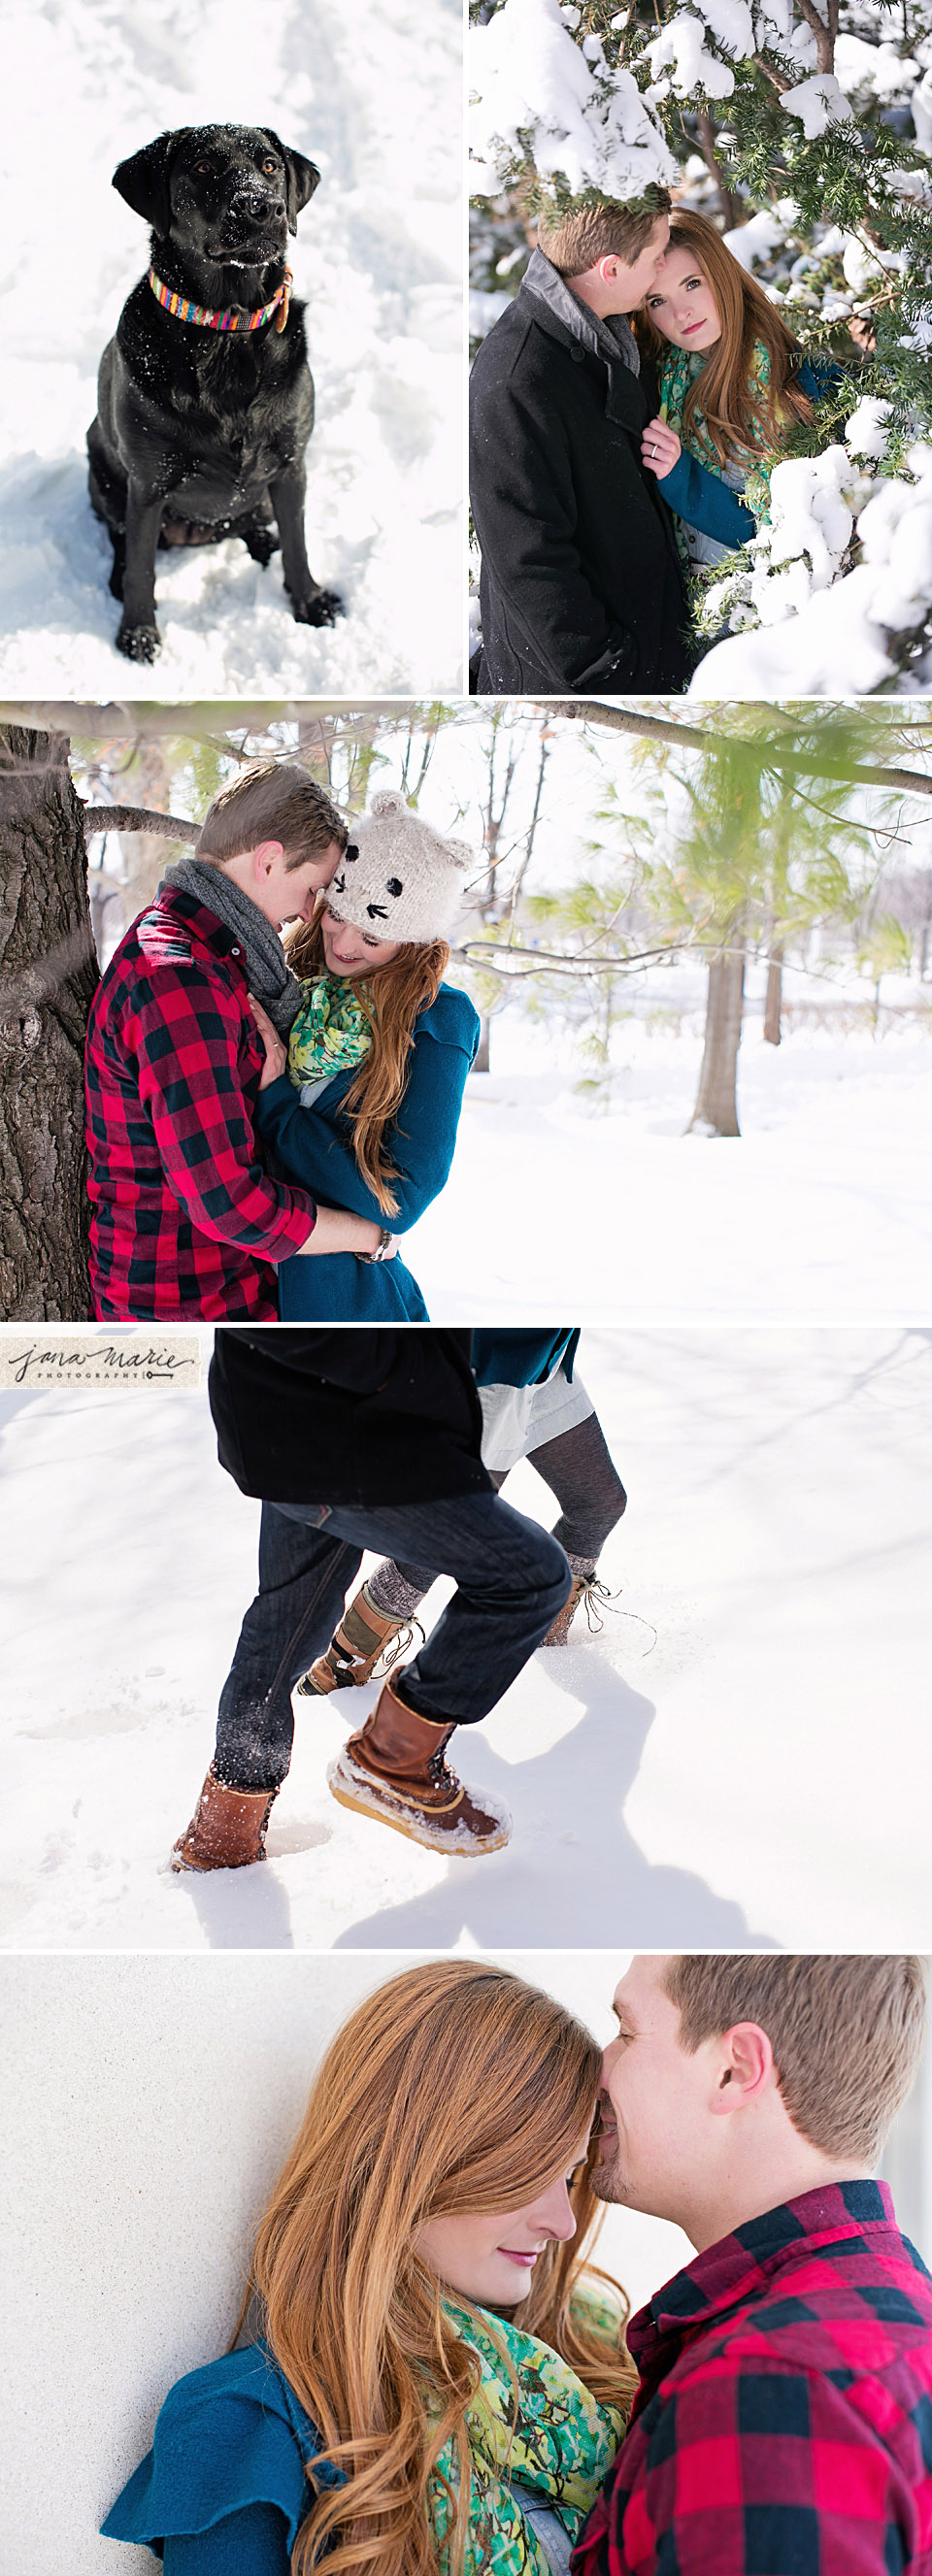 Love, snowflakes, Beloved sessions, Independence portrait photographer, Jana Marie Photos, Snow boots